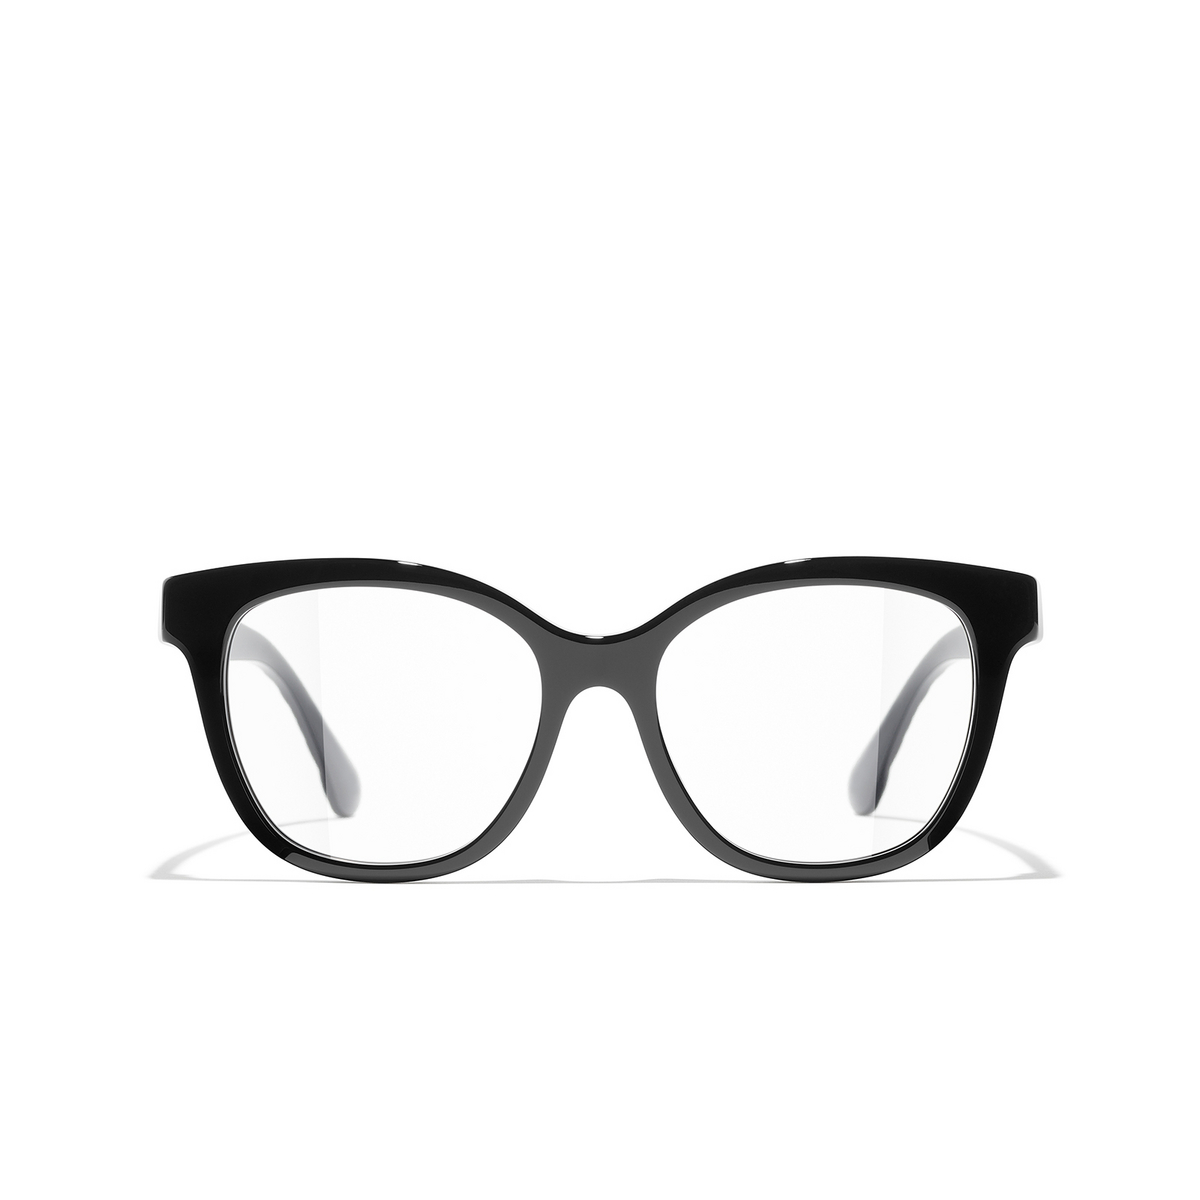 CHANEL butterfly Eyeglasses C760 Black & White - front view